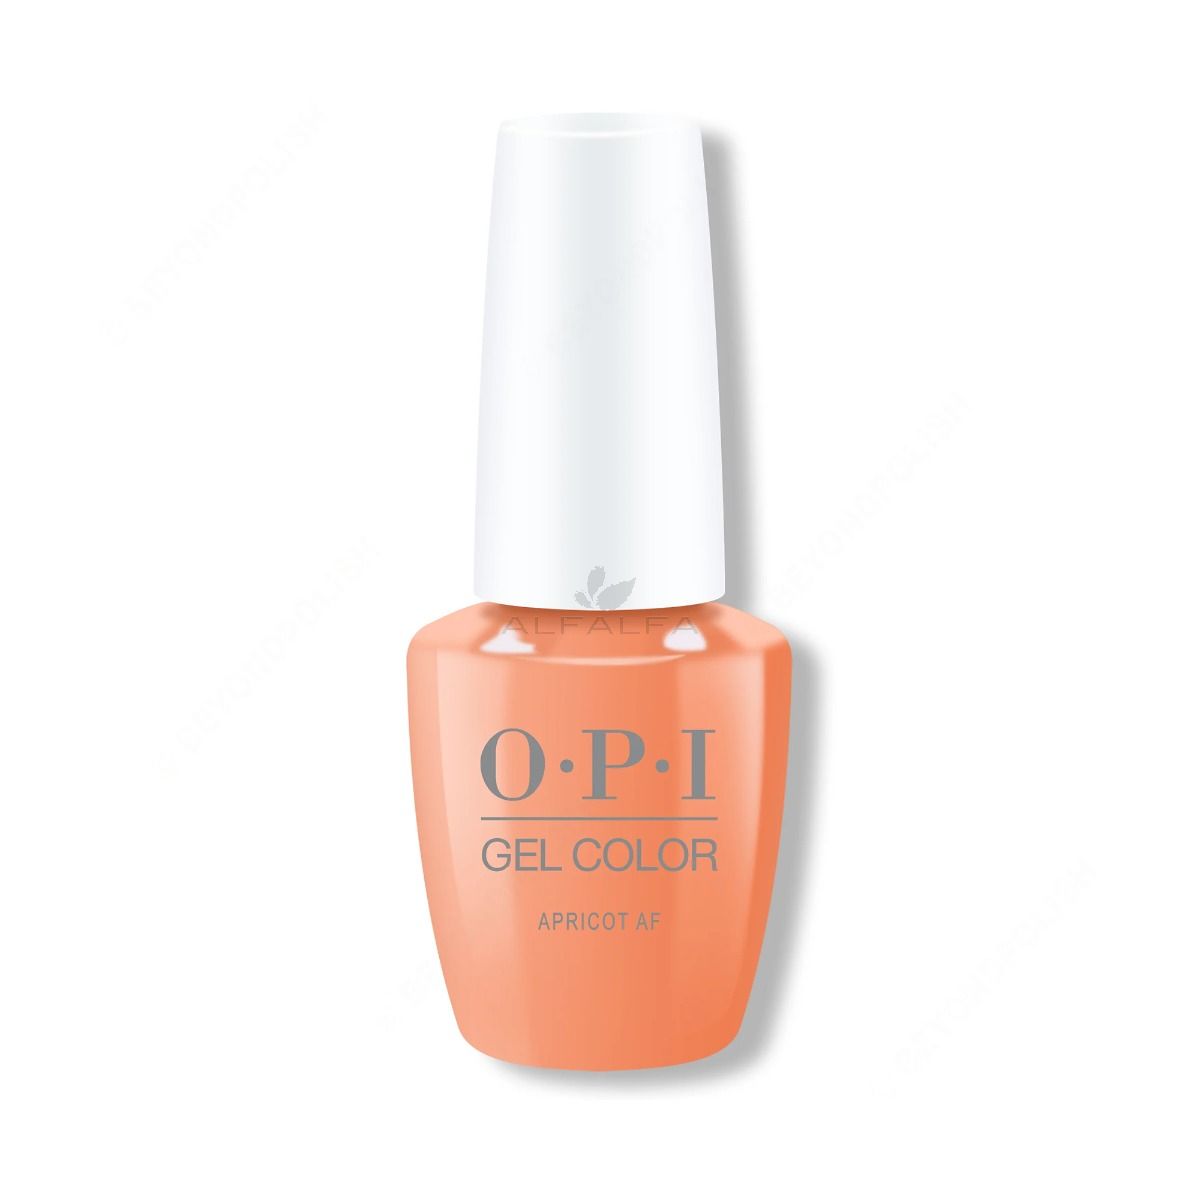 OPI Spring Collection 2024 - Gel Colors